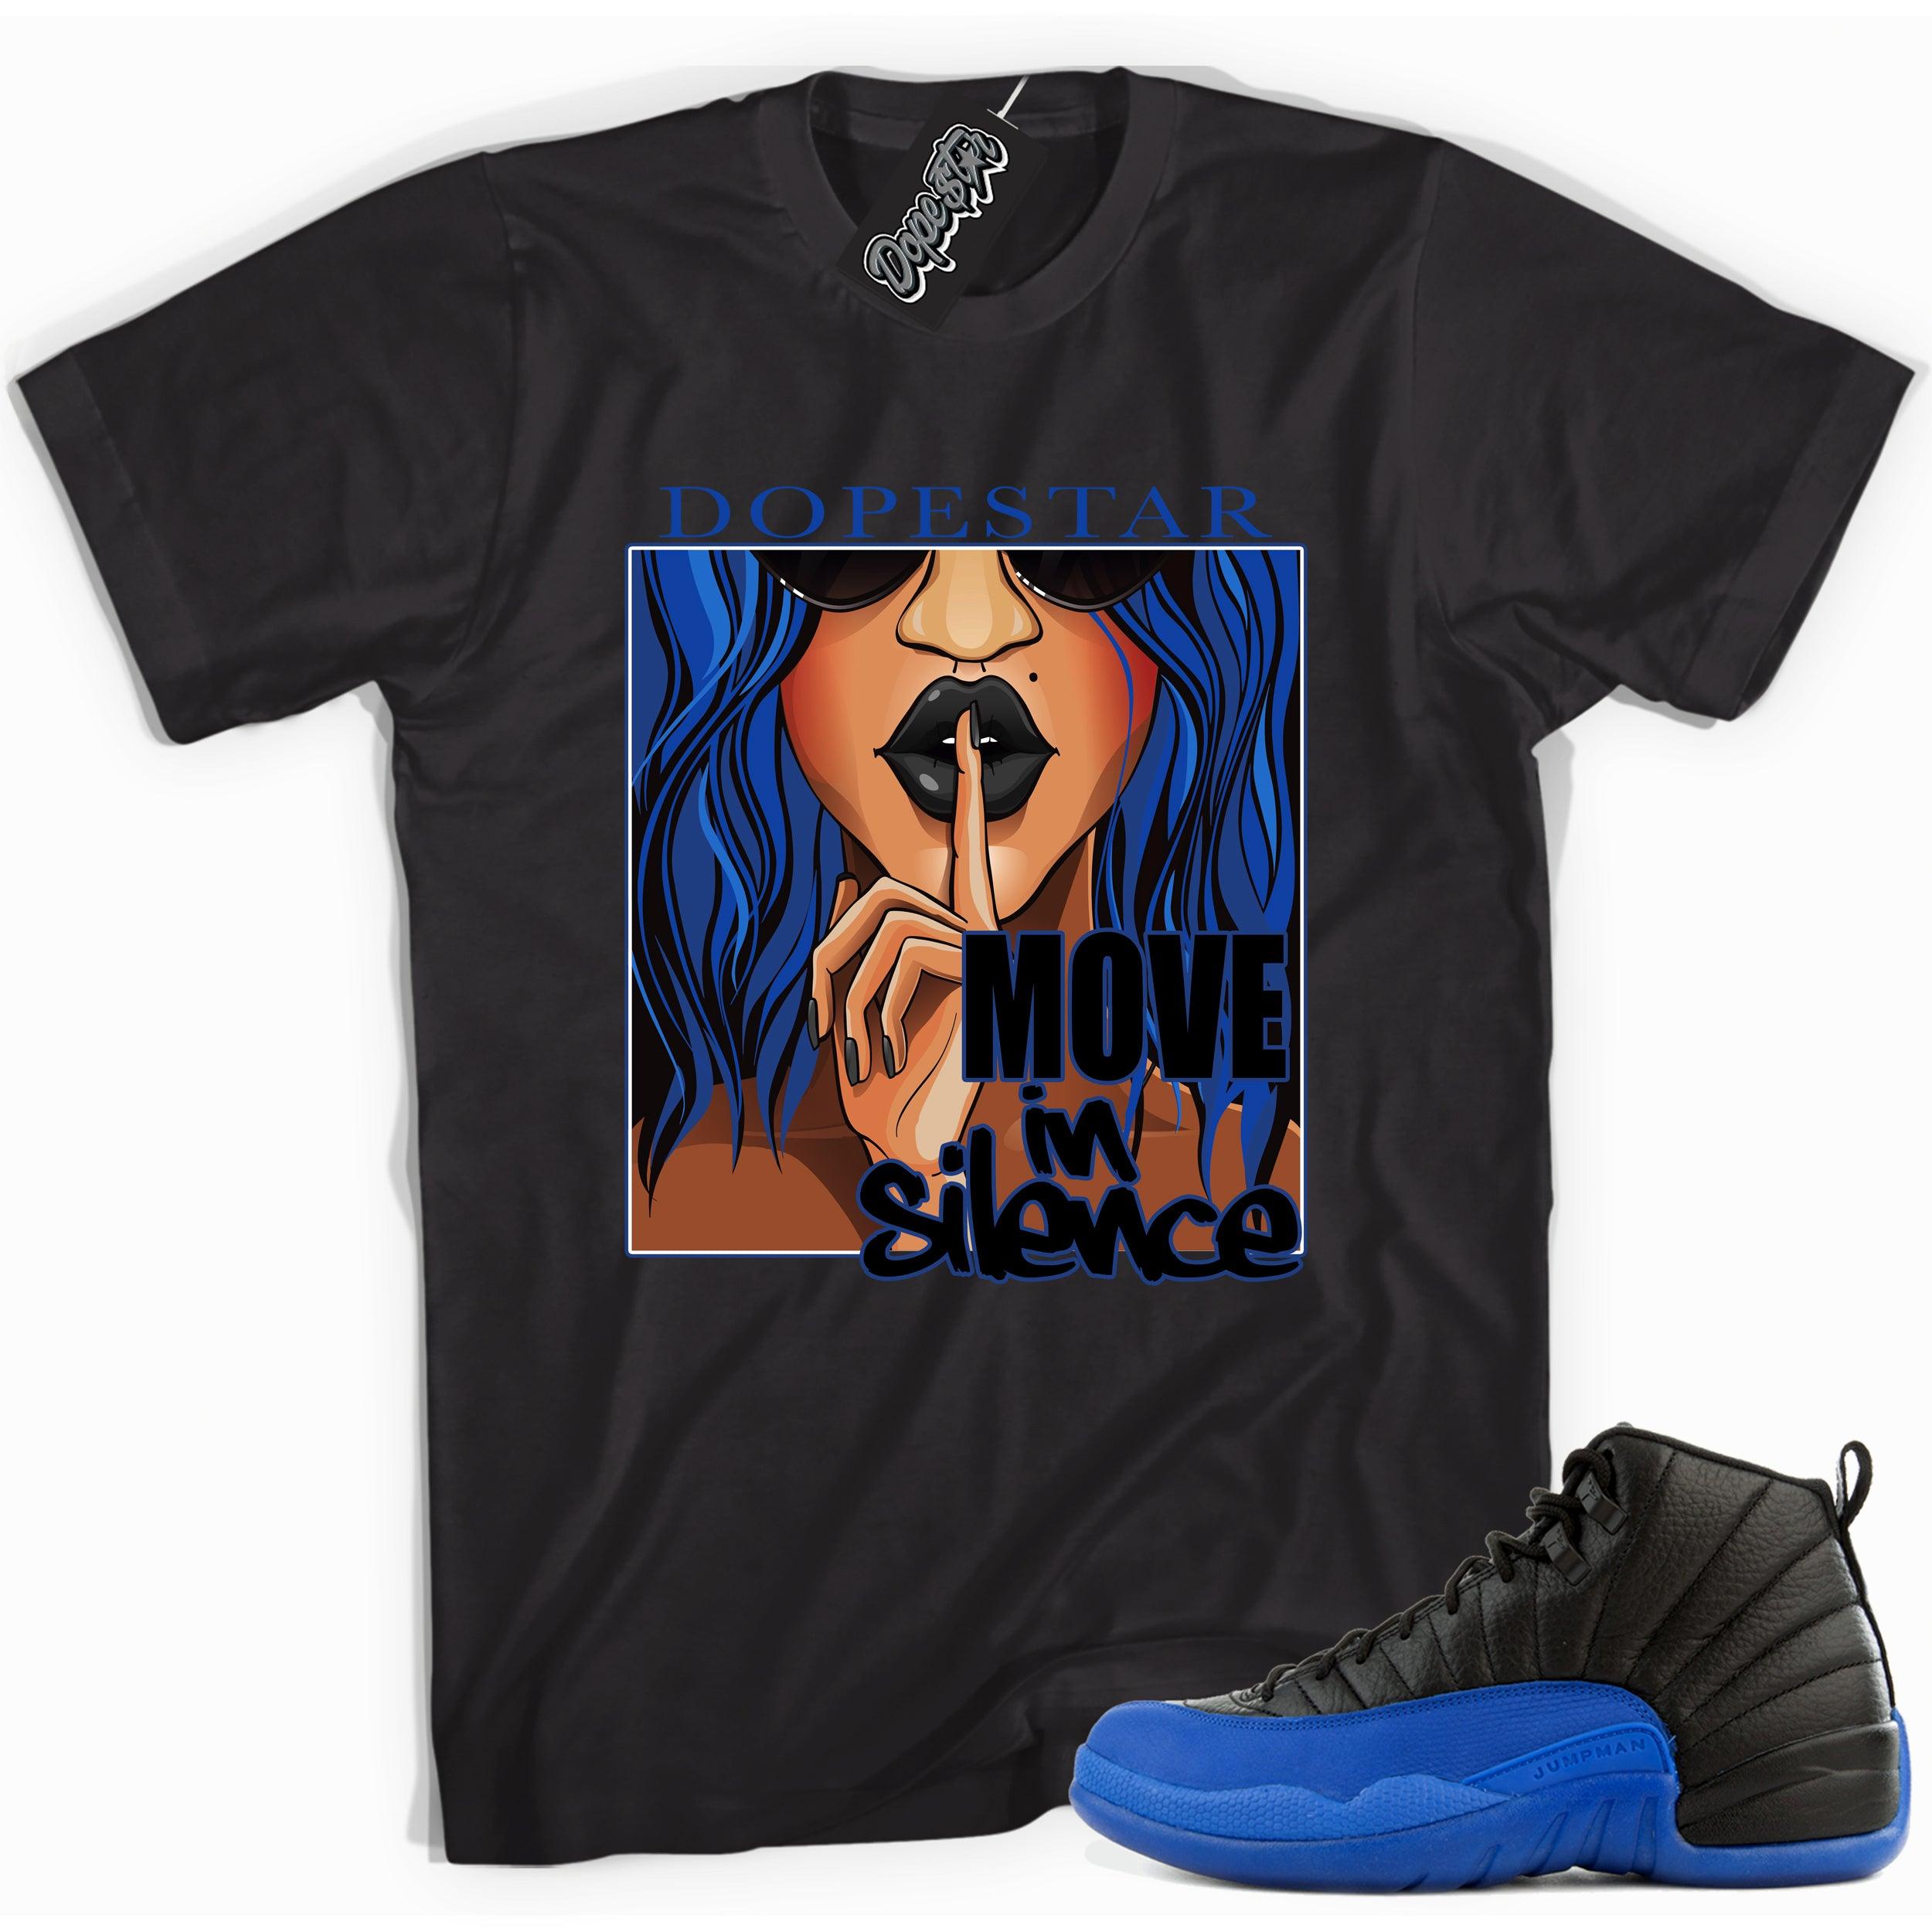 Cool black graphic tee with 'move in silence' print, that perfectly matches  Air Jordan 12 Retro Black Game Royal sneakers.